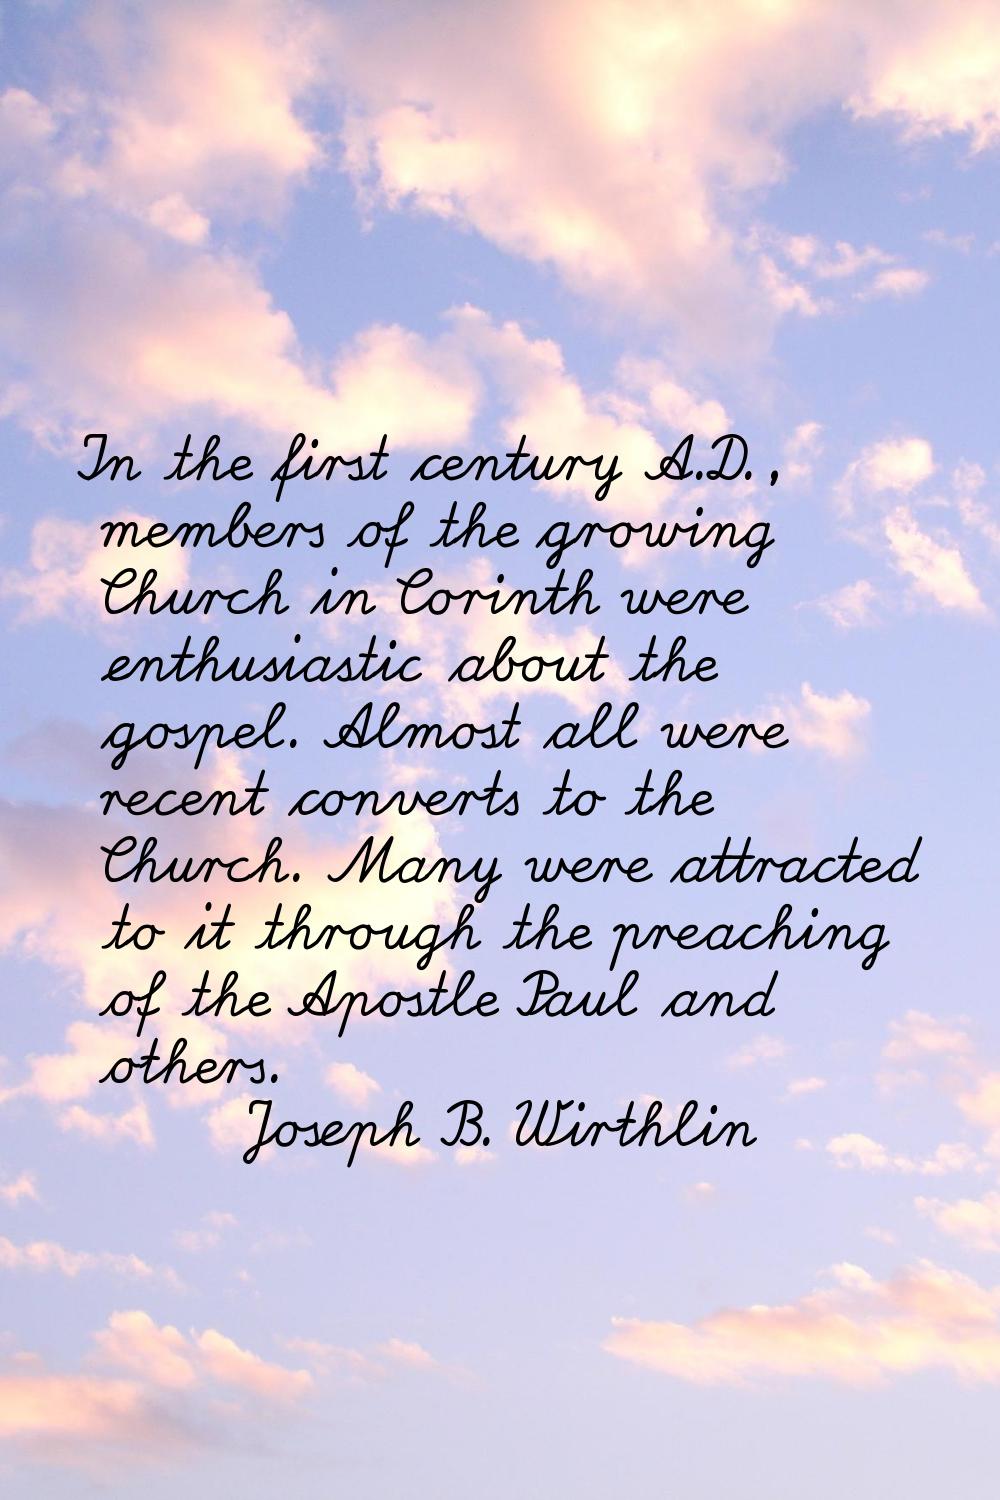 In the first century A.D., members of the growing Church in Corinth were enthusiastic about the gos